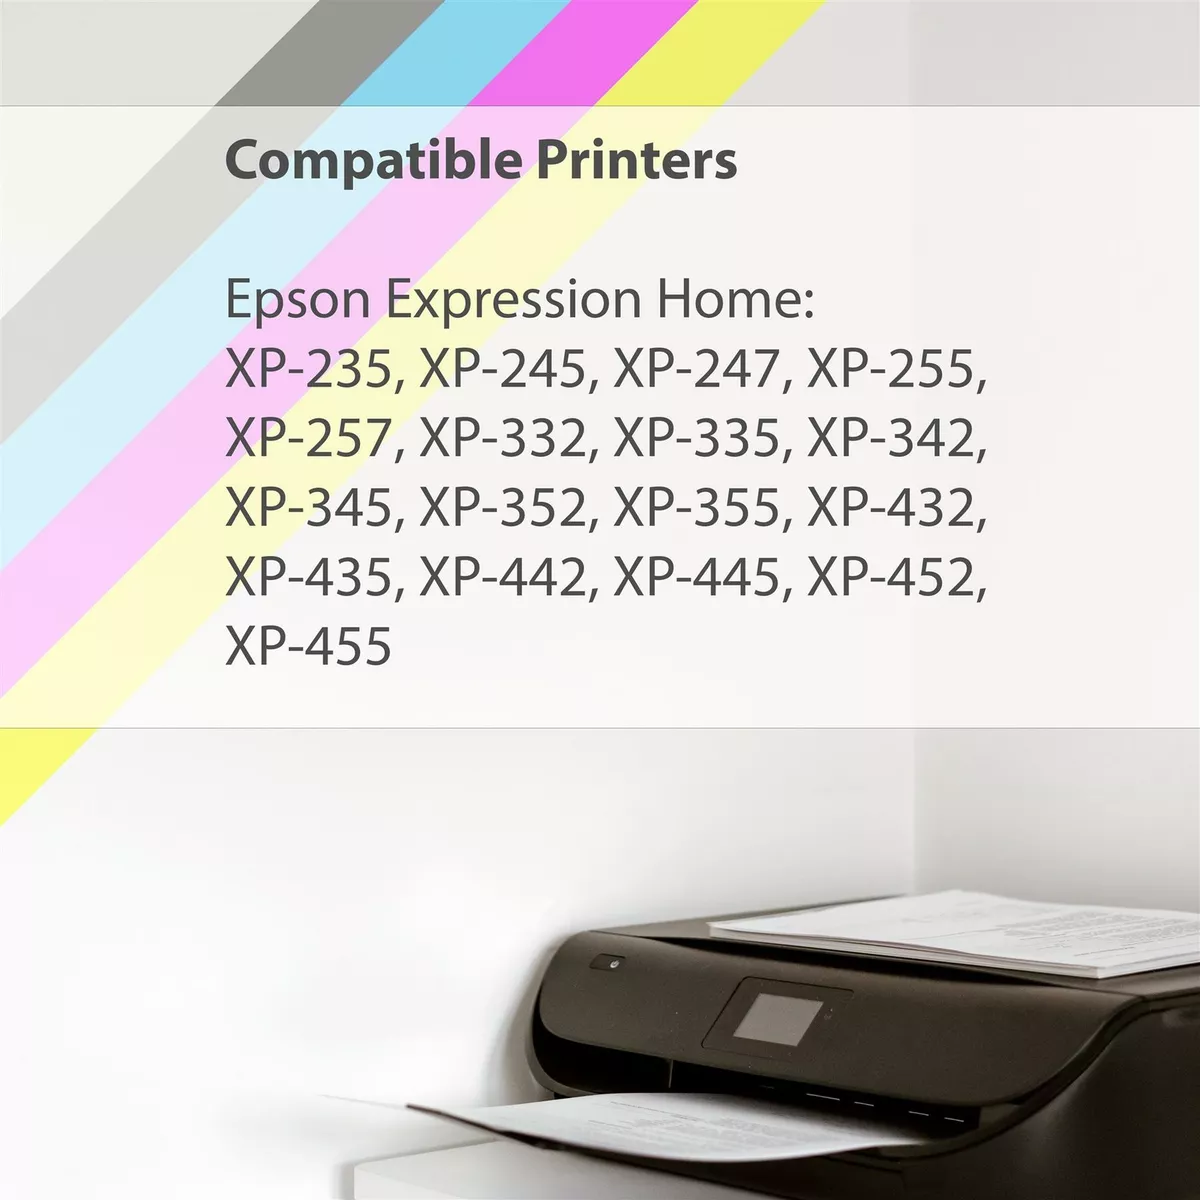 5x Ink Cartridges for Epson XP 235 245 332 342 345 432 435 442 335 445  Printers